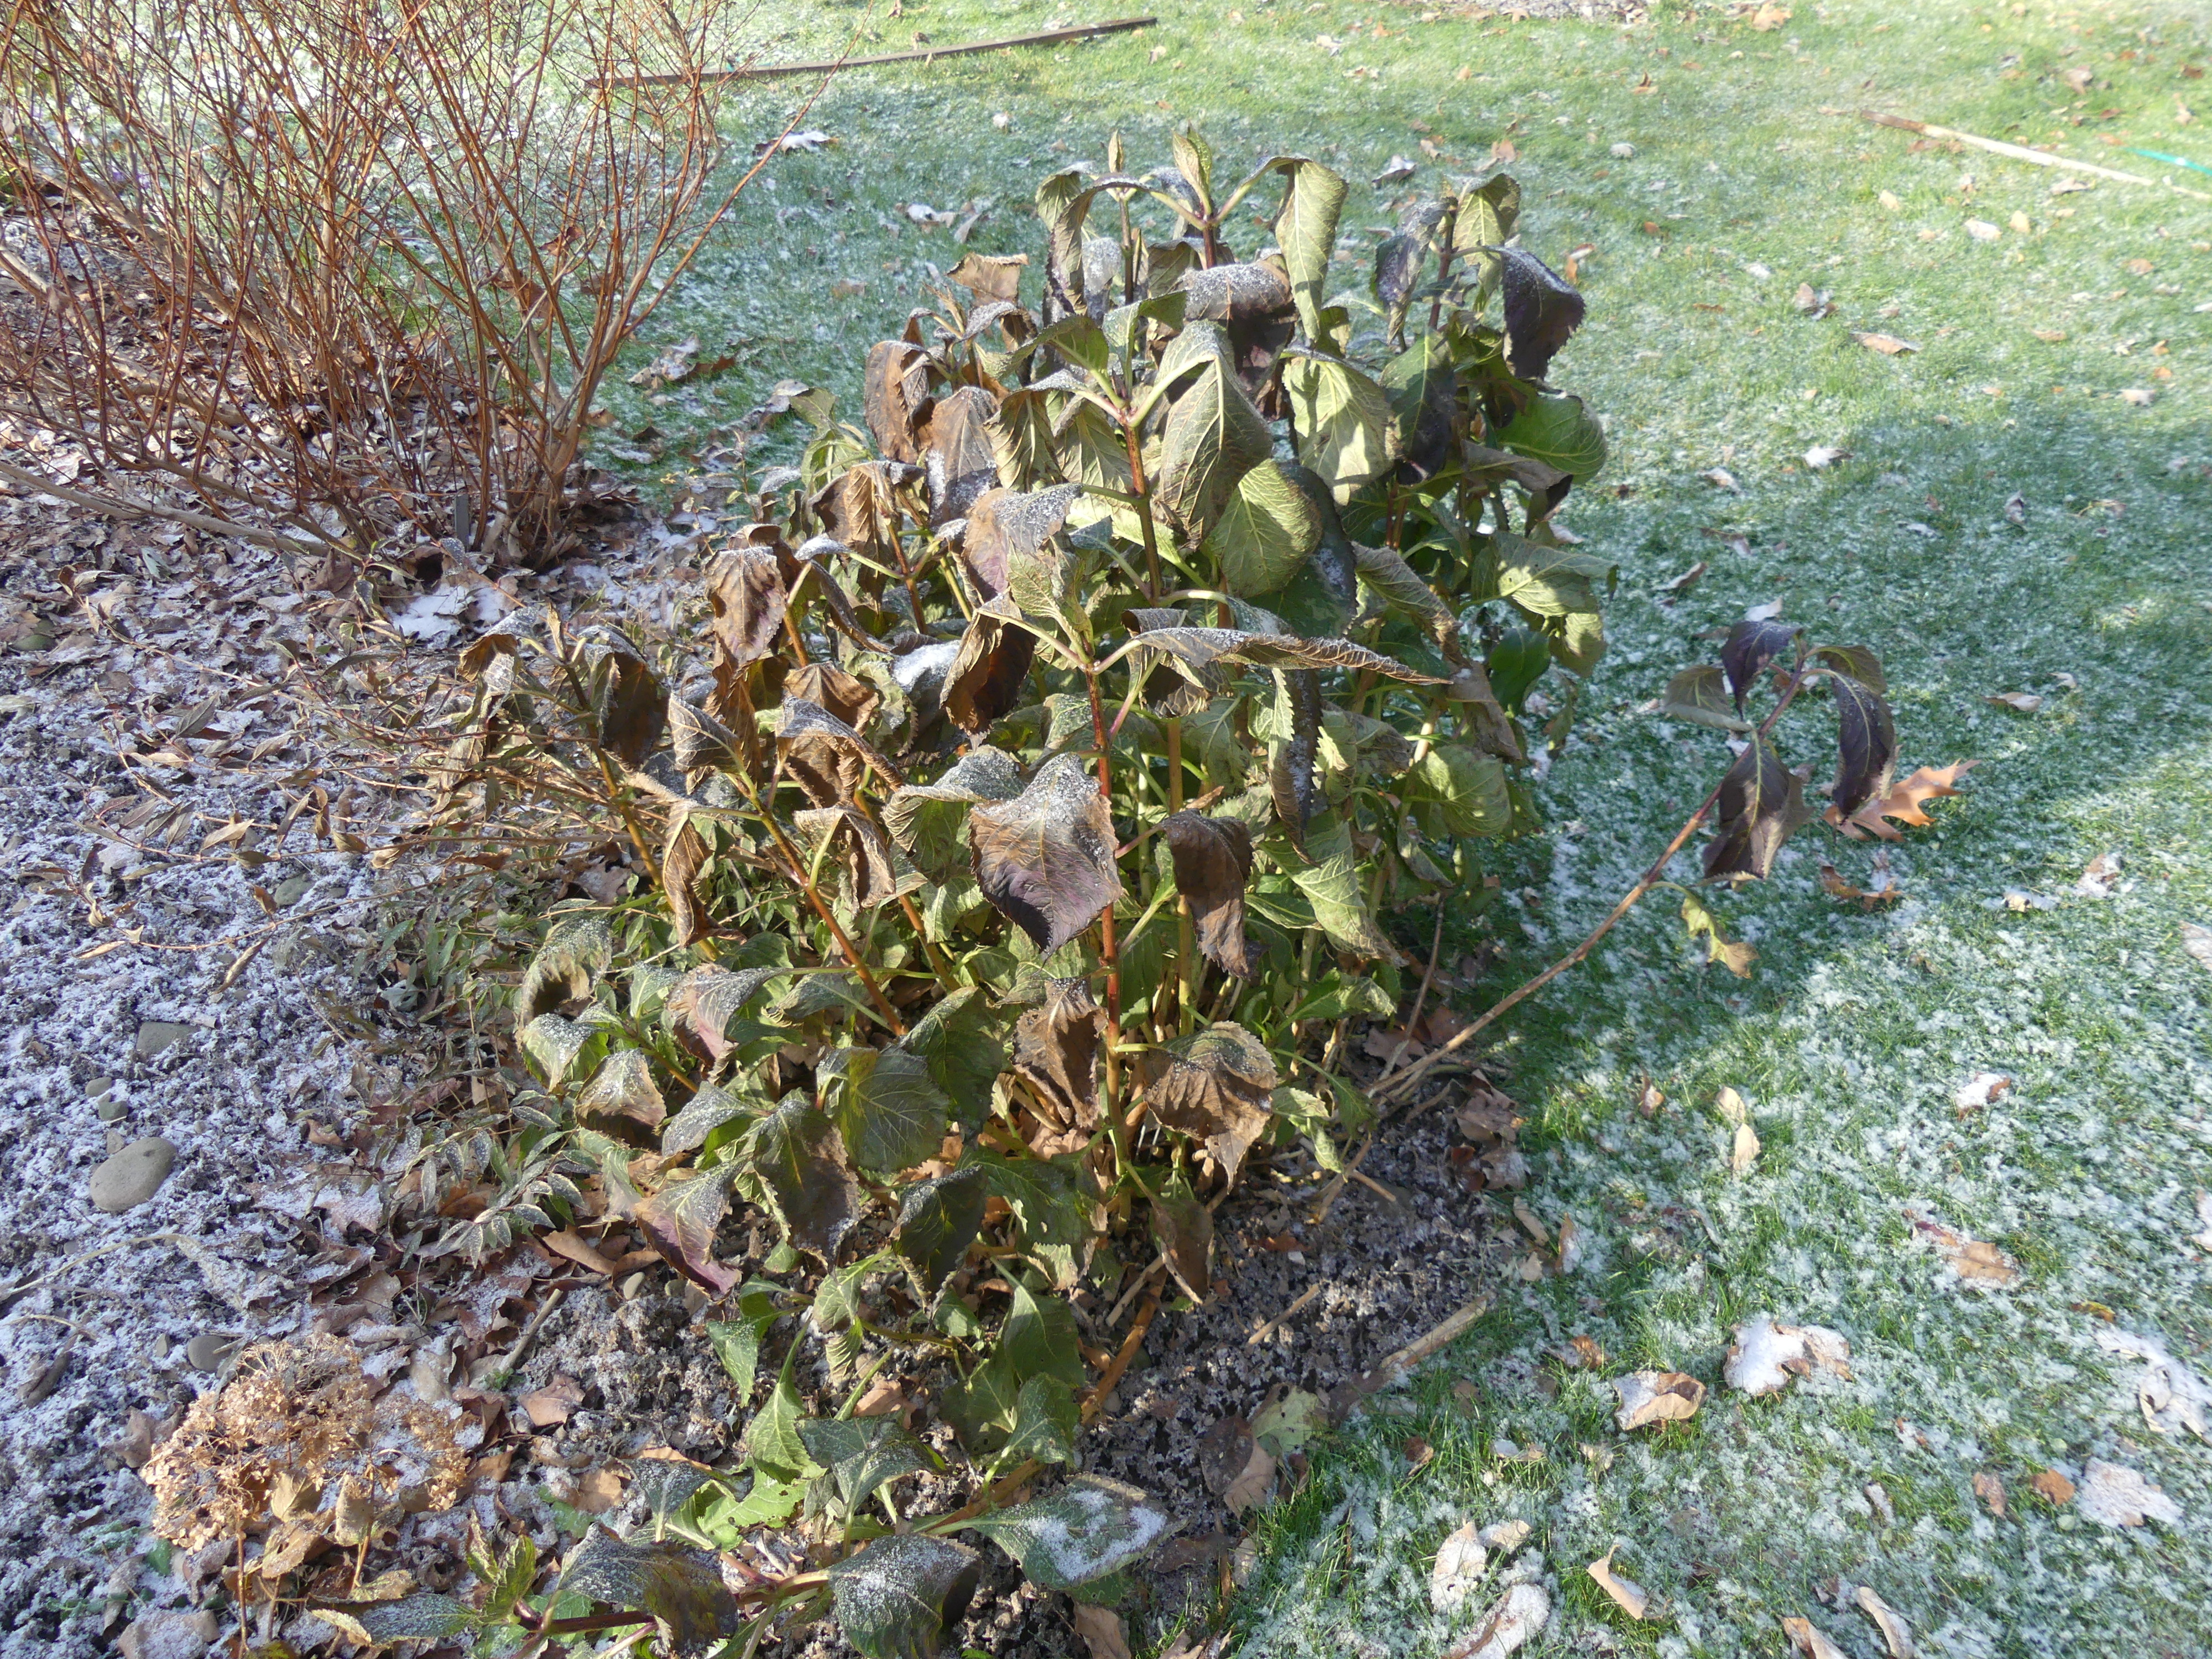 On the morning of November 9 the growing season came to an abrupt stop when temperatures on the North and South Forks dropped below freezing. This hydrangea is a good example of the morning after. Clearly, it’s time to put things to bed as it got much colder a few days later. ANDREW MESSINGER